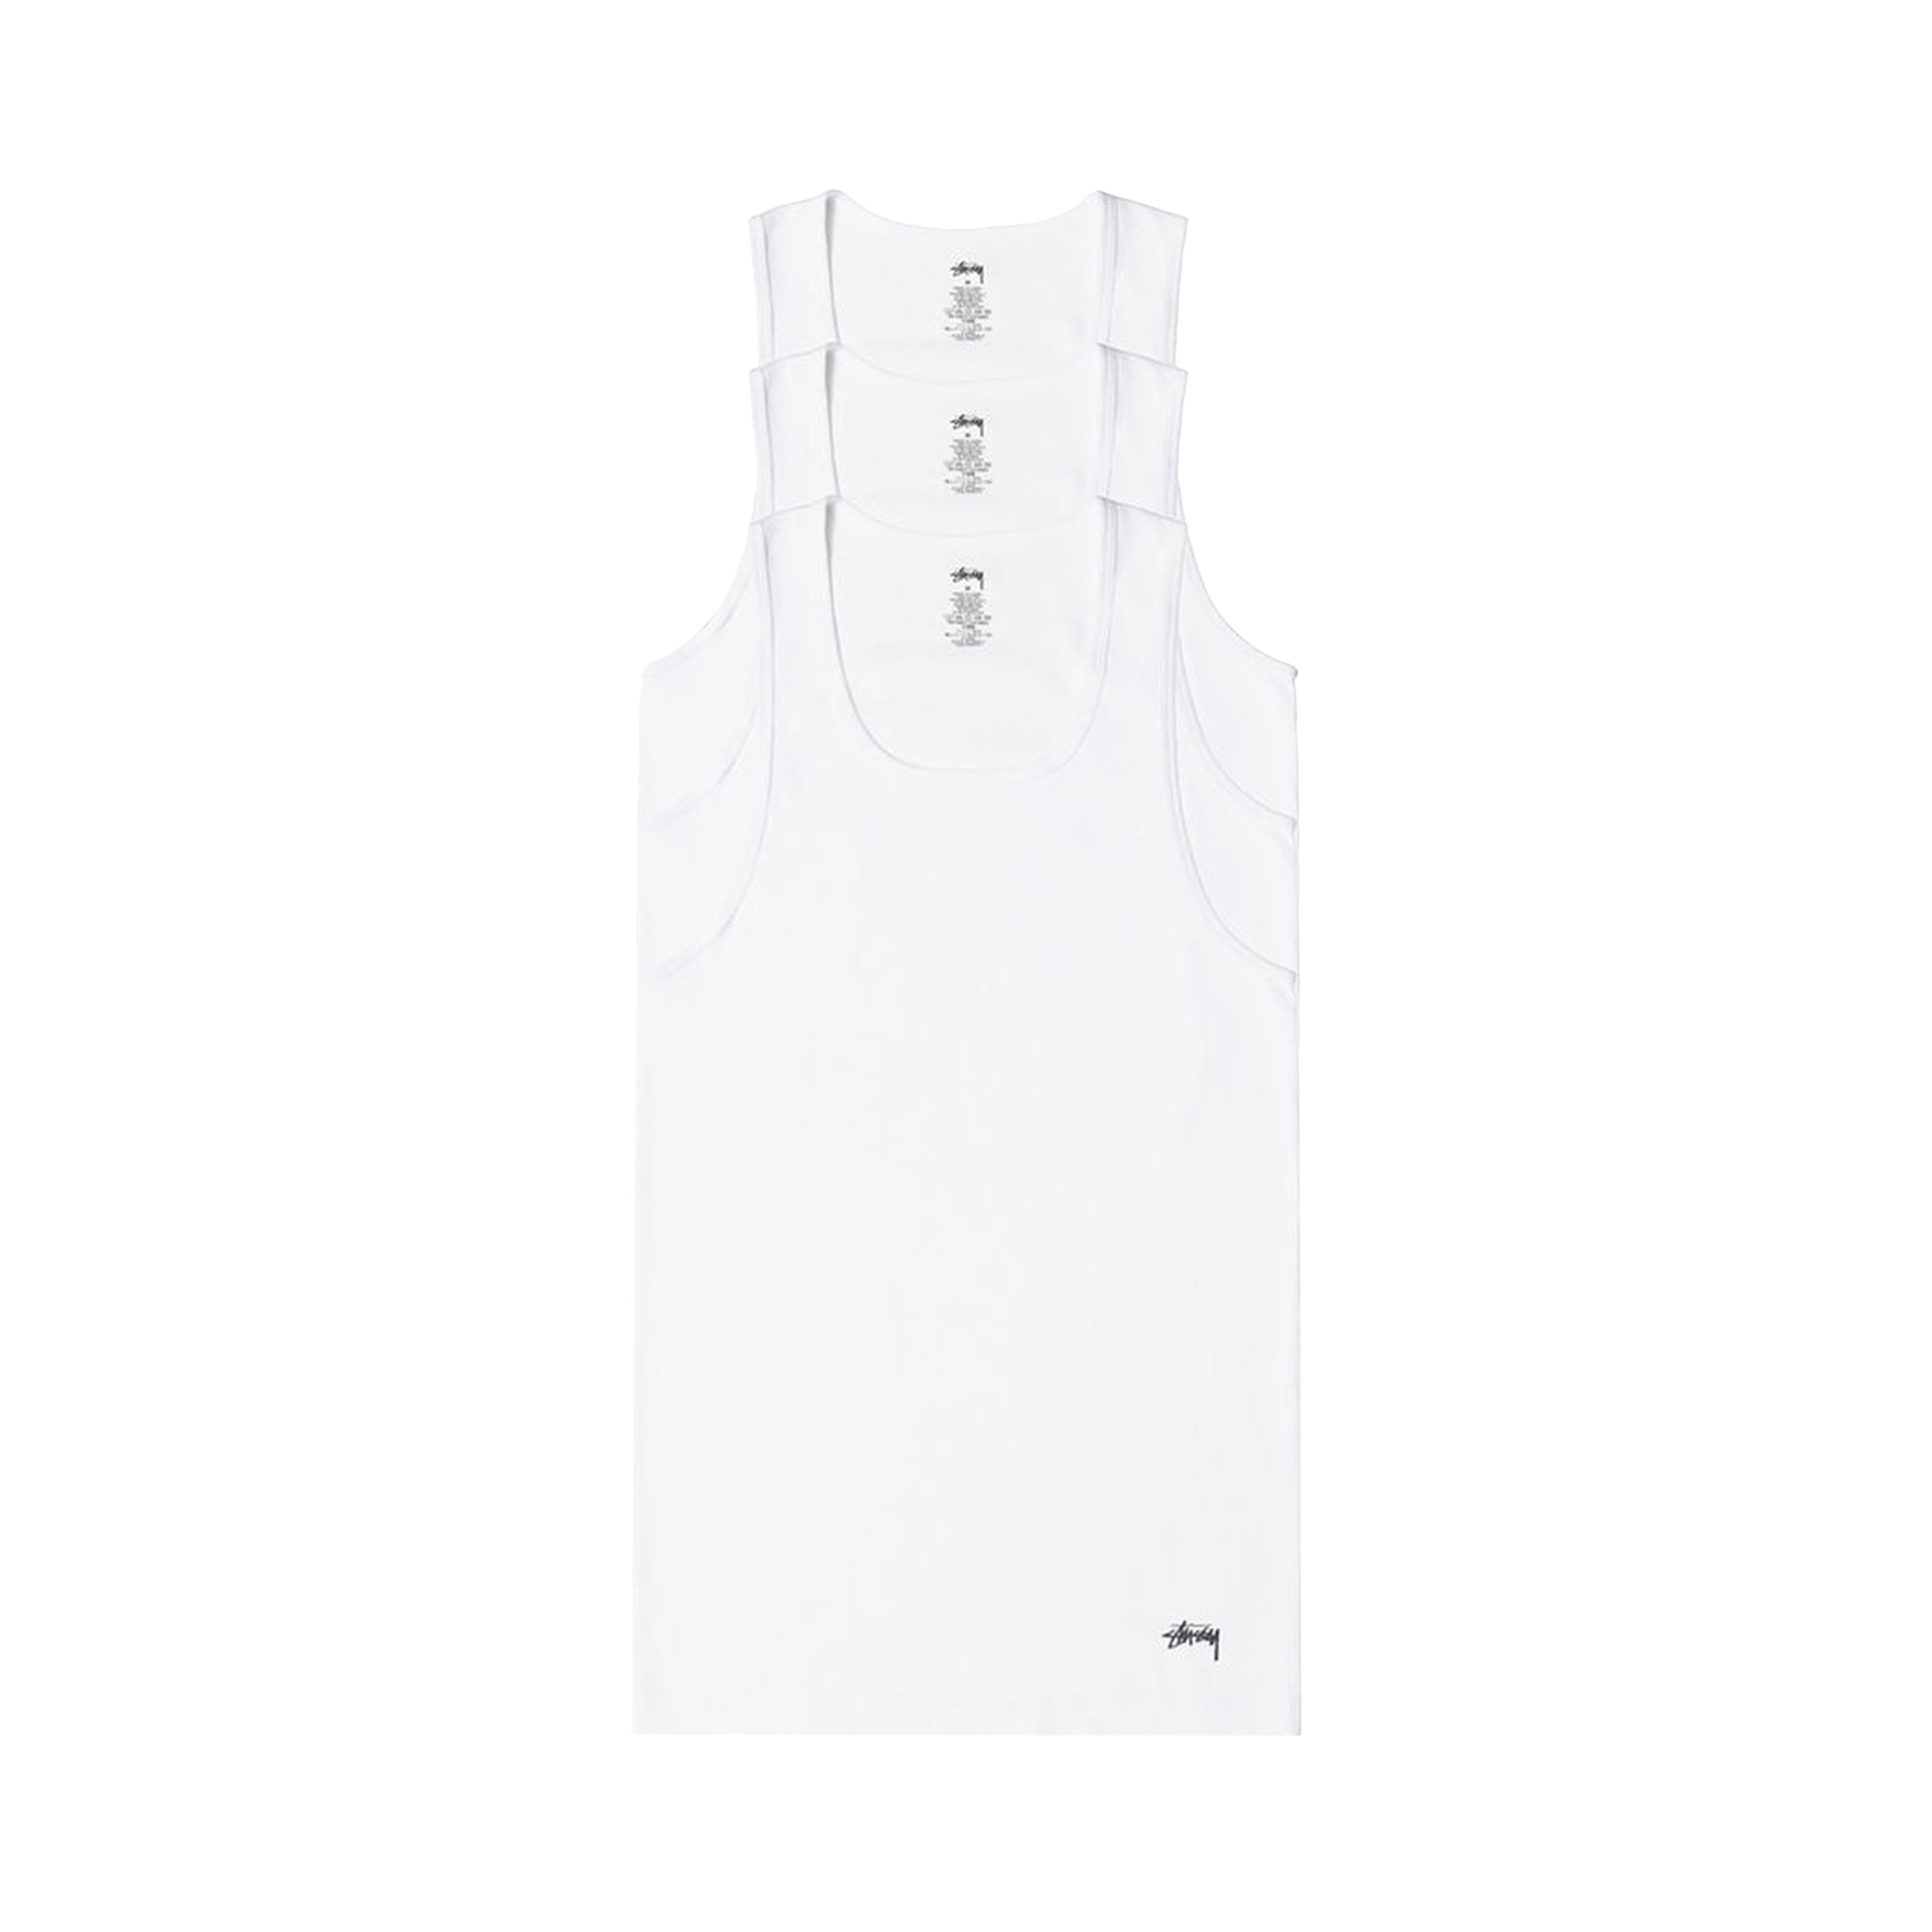 Pre-owned Stussy Ribbed Tank - 3 Pack 'white'